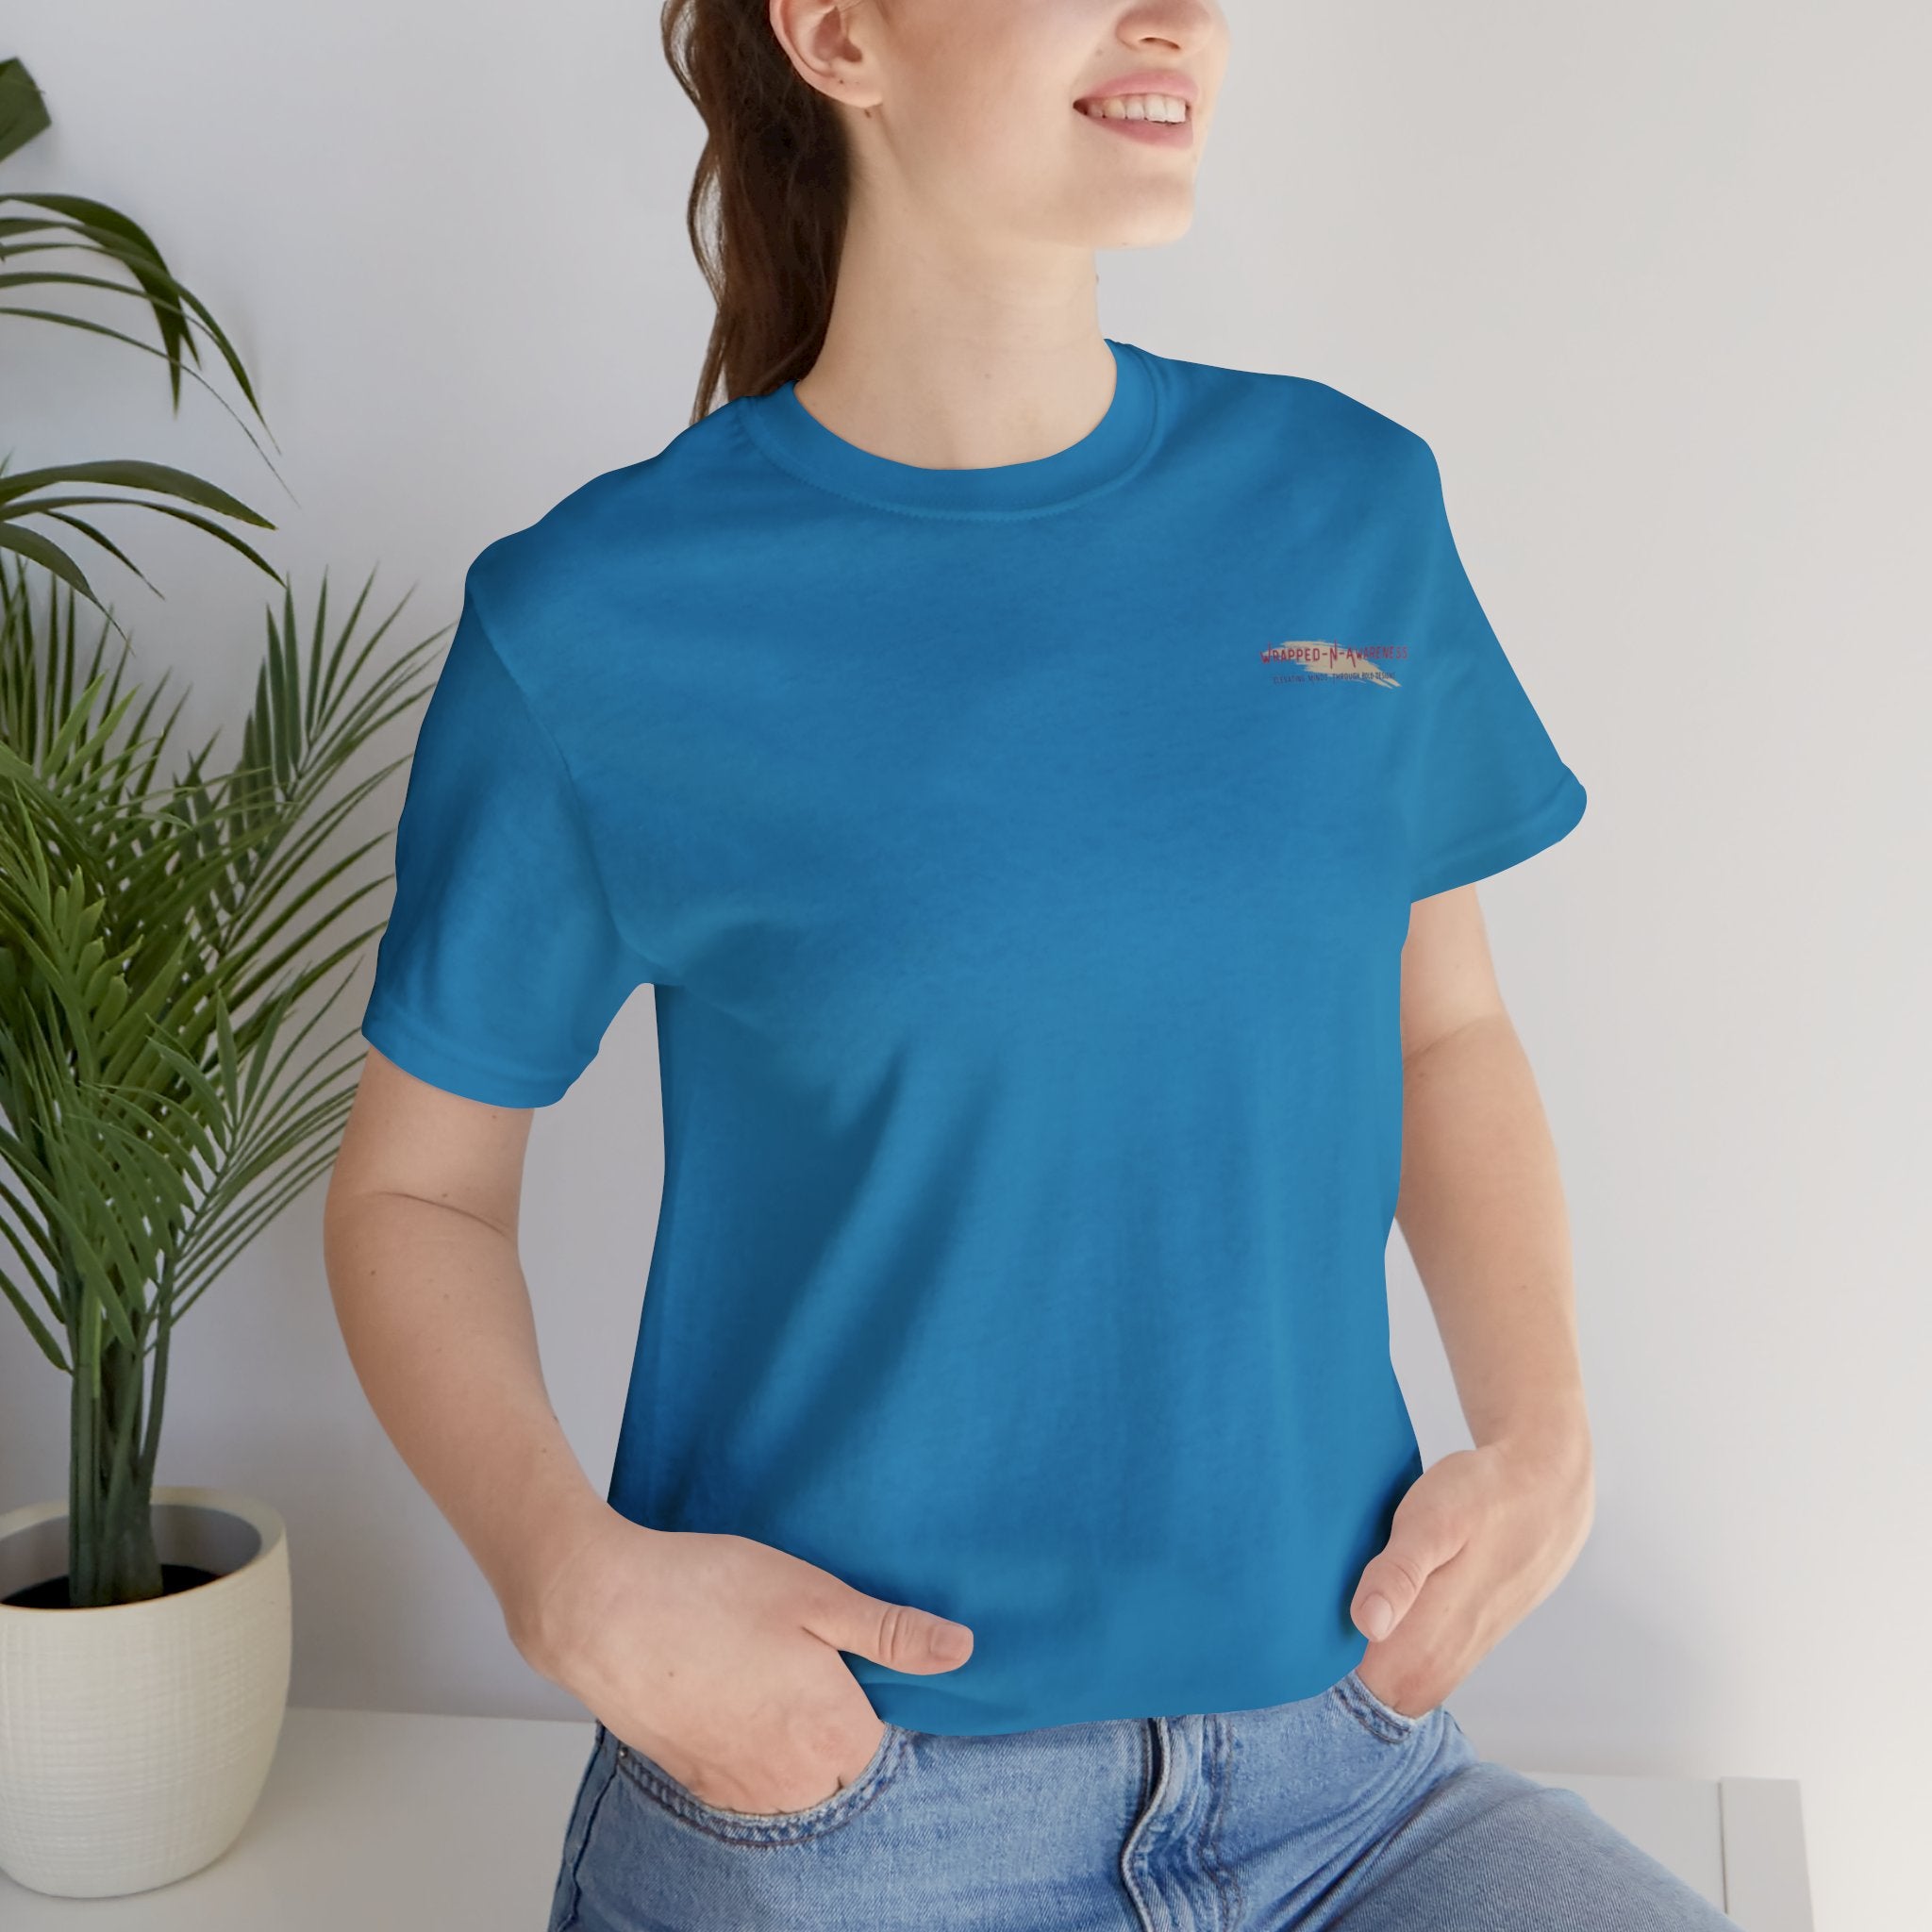 Release Your Mind Jersey Tee - Bella+Canvas 3001 Heather Mauve Airlume Cotton Bella+Canvas 3001 Crew Neckline Jersey Short Sleeve Lightweight Fabric Mental Health Support Retail Fit Tear-away Label Tee Unisex Tee T-Shirt 12842352219637597458_2048 Printify